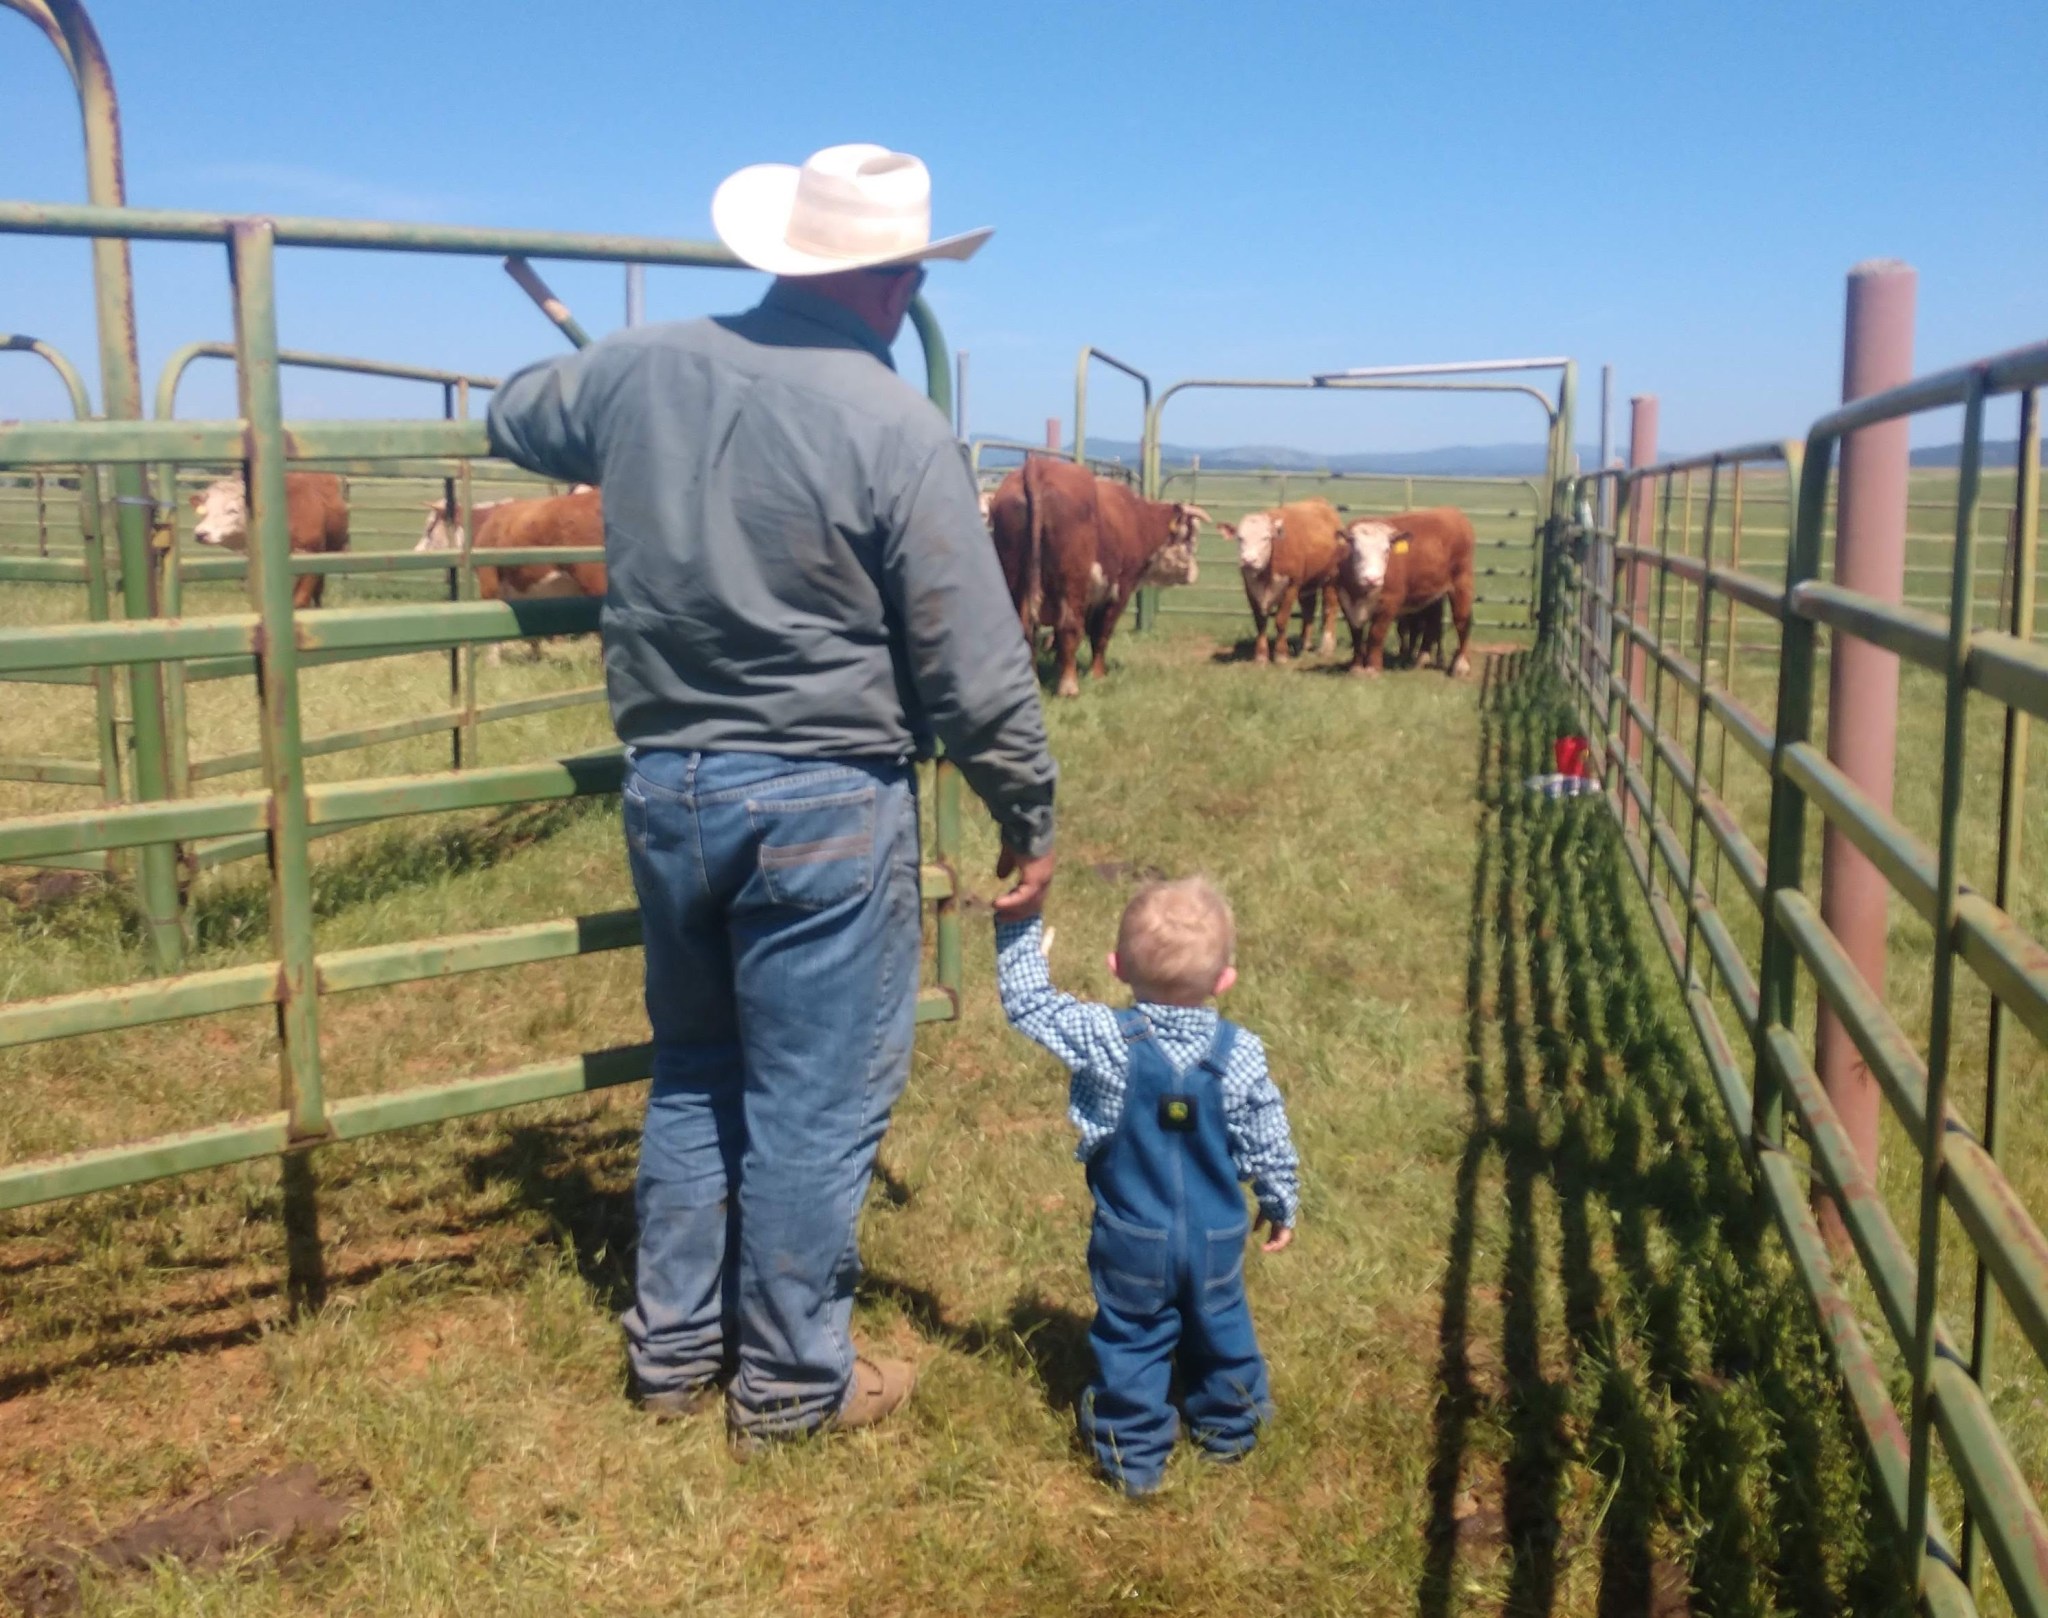 A man in a cowboy hat, jeans, and a button down shirt stands at the end of a cattle corral, facing away from the camera. He is holding hands with a young child wearing overalls and a button down shirt. They are both looking at some cows further down in the corral.